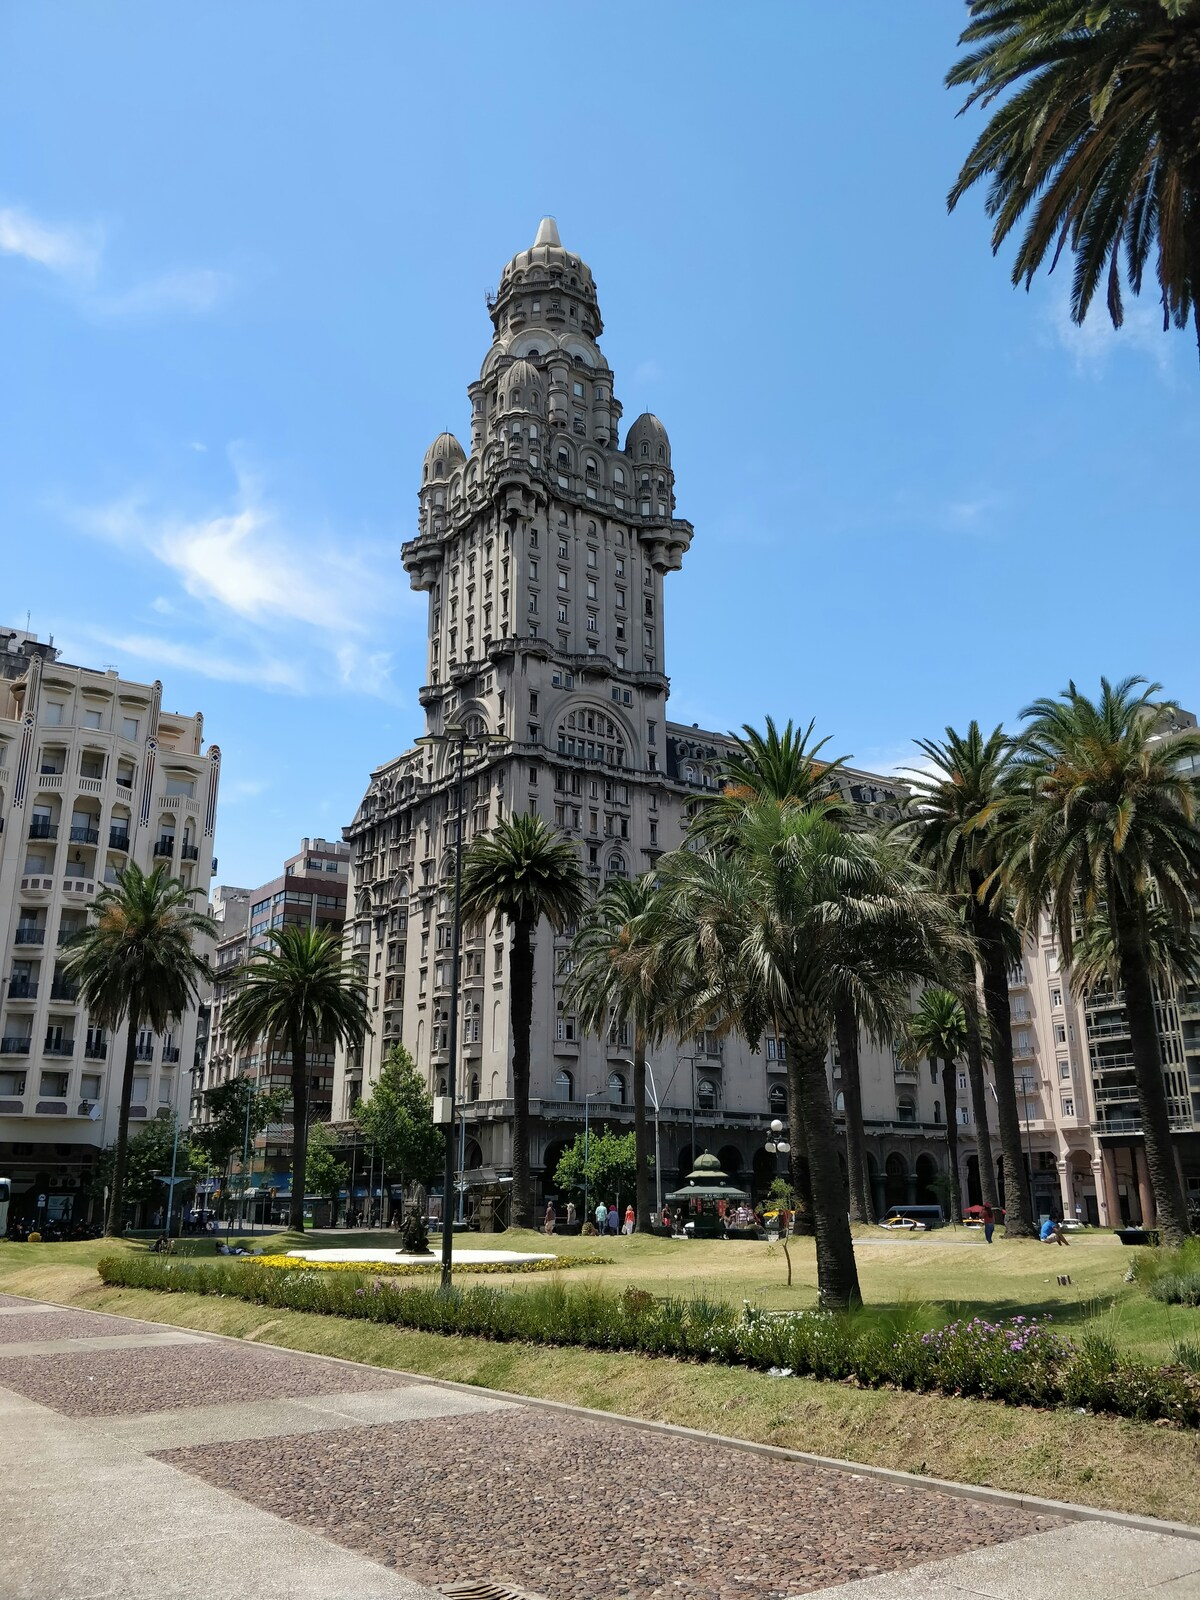 Image of Independence Square, Montevideo by Team PhotoHound